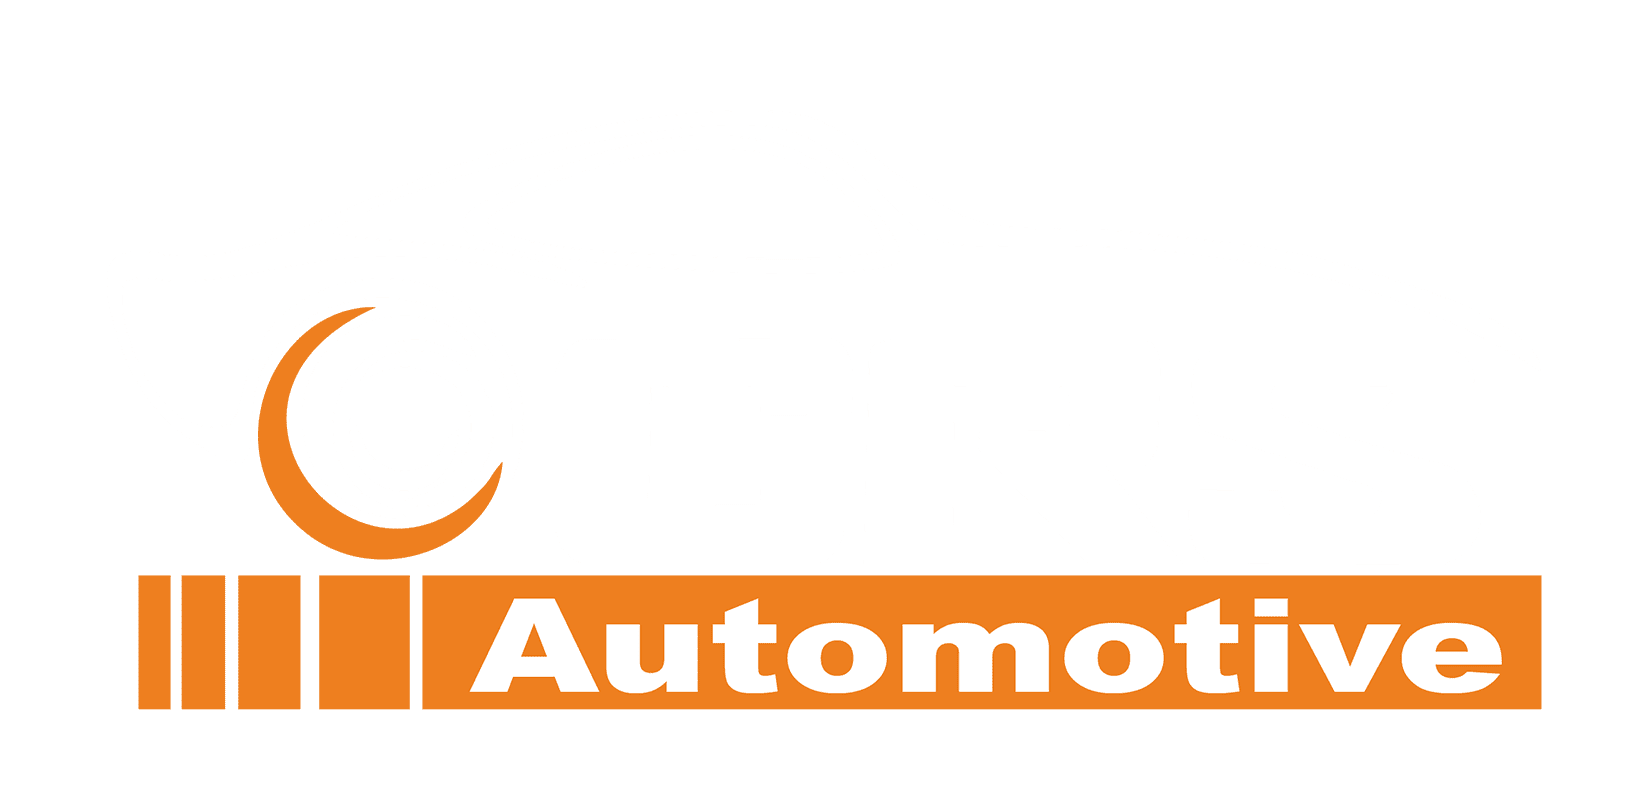 The CRS Automotive Logo consisting of the letters 'CRS' integrated into the outline of a white car. The word 'Automatic' is written in white font against an orange background.